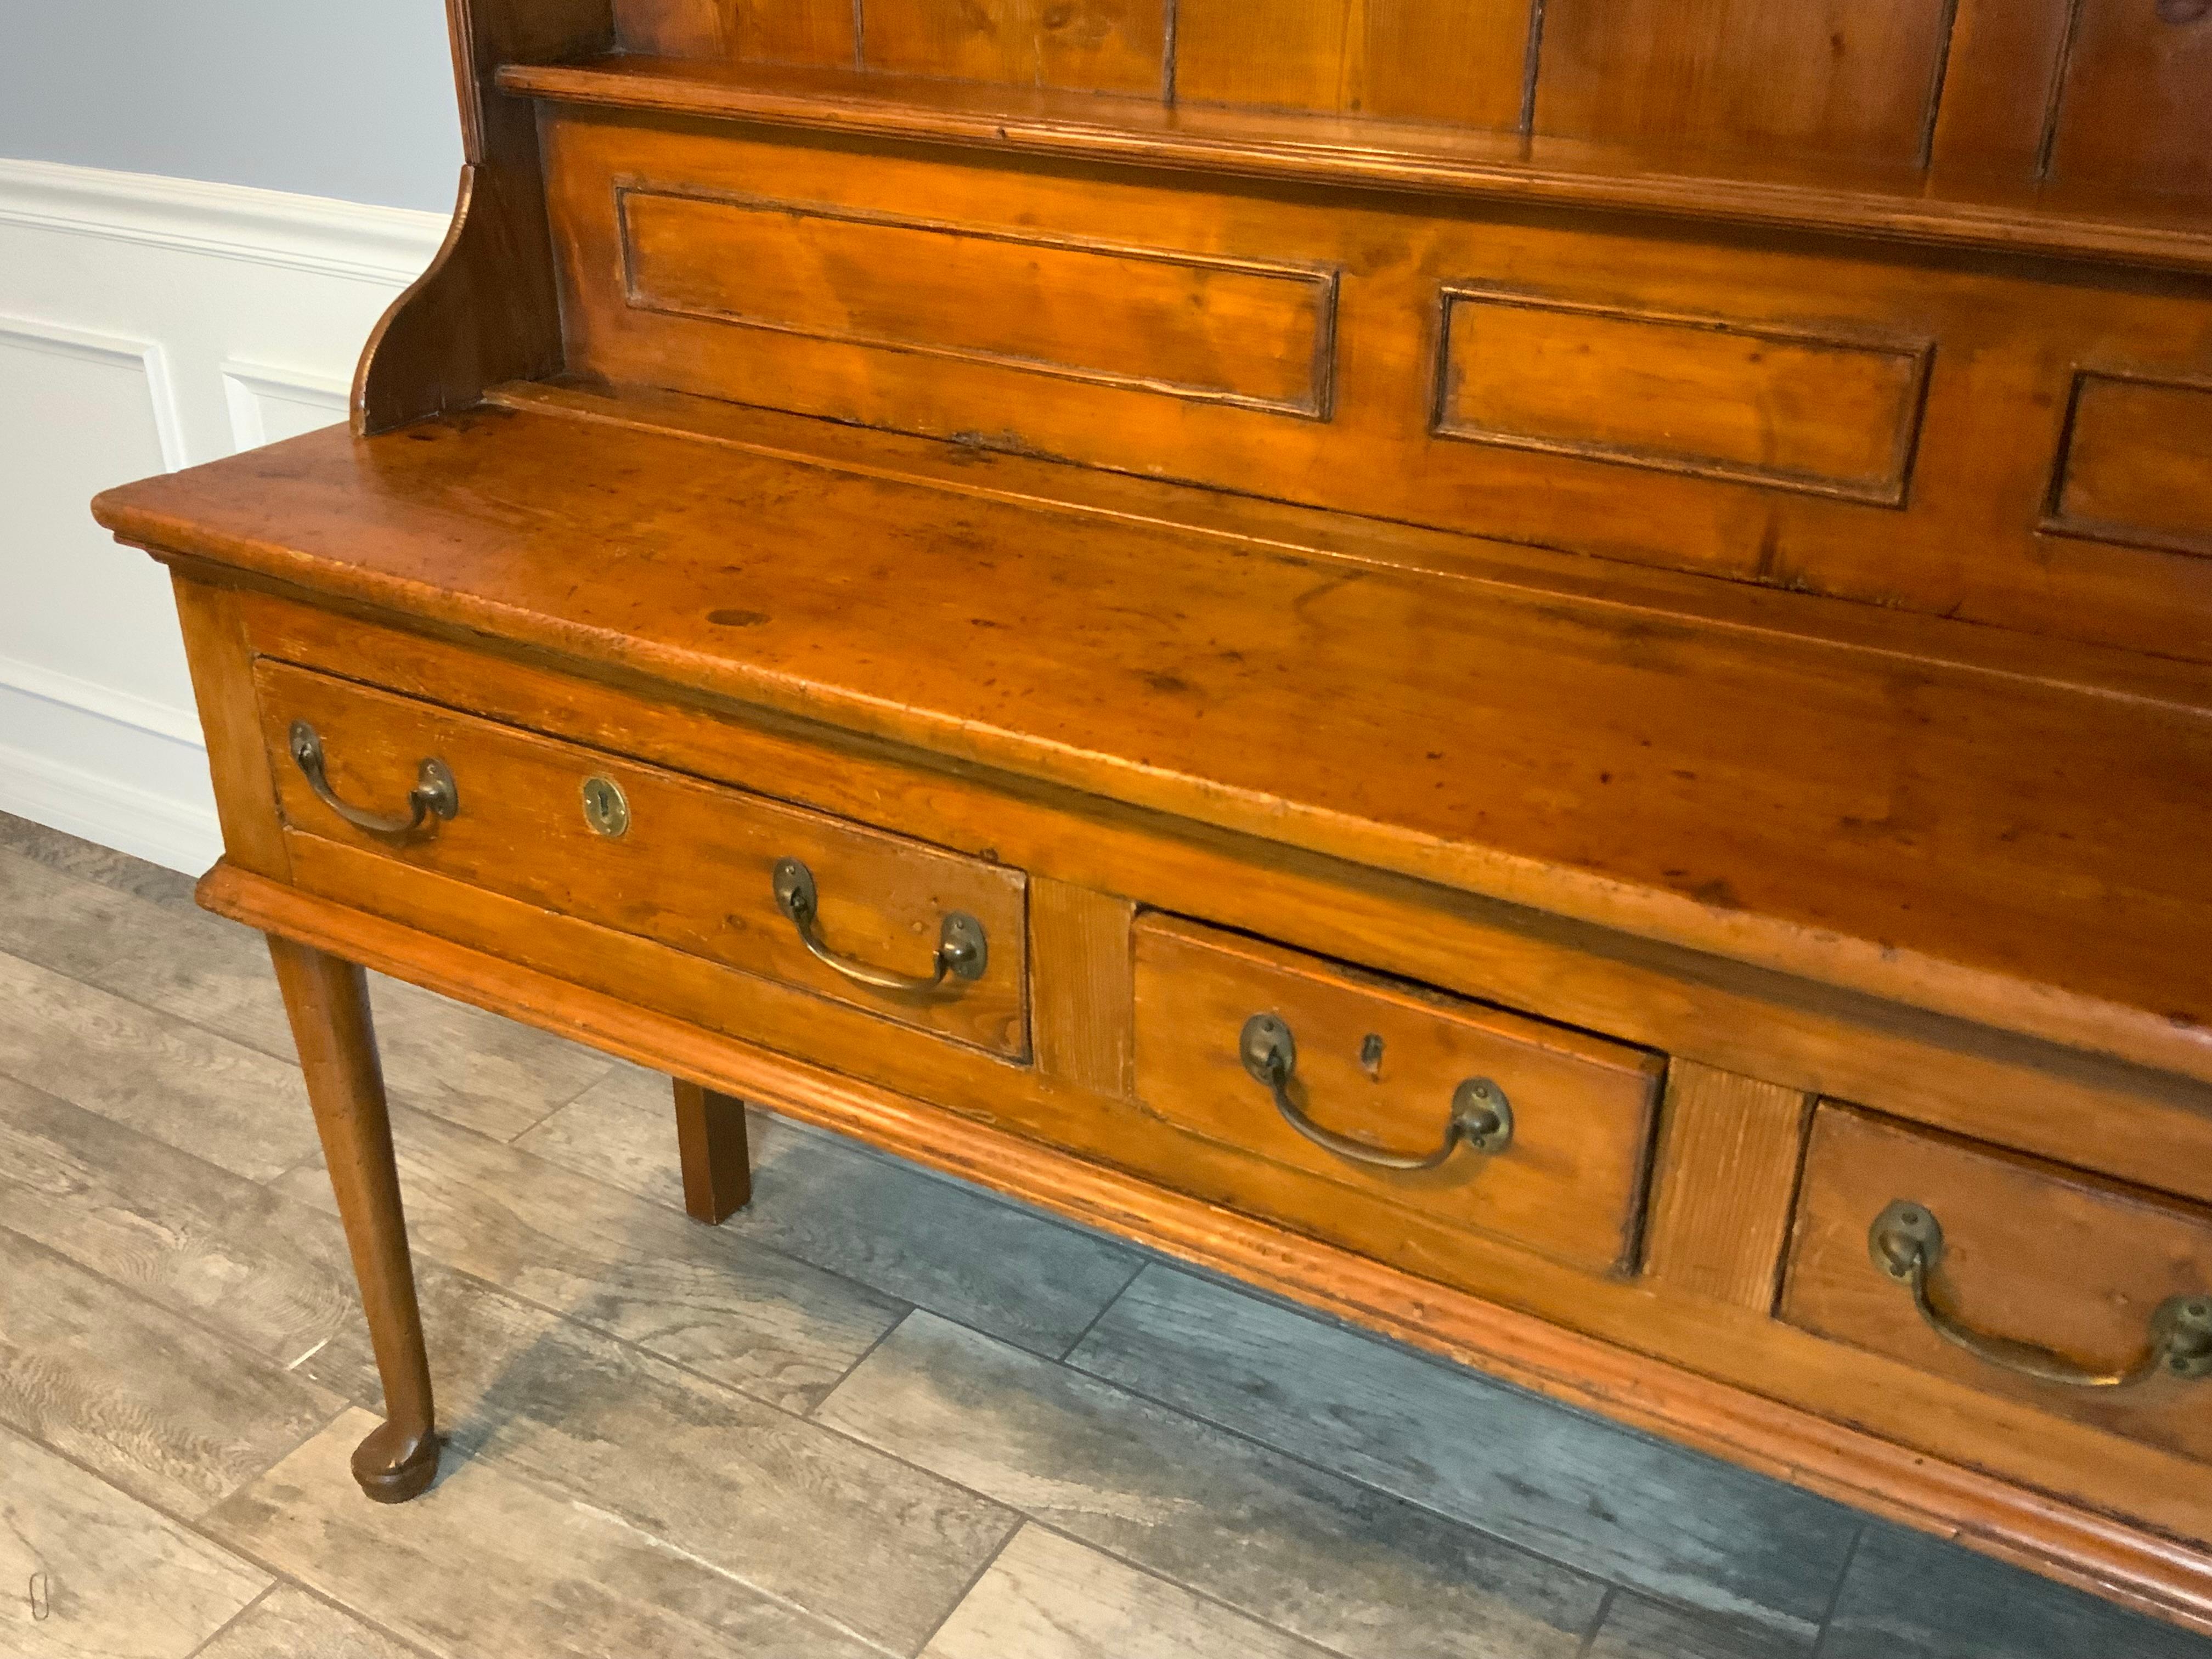  Very attractive two piece mid 18th century Pine Welsh Dresser.  Original hardware and drawer locks are intact.   Very good condition with an excellent color and aged patina to the old refinish.  Graduated size shelf plate racks at 5 1/4”, 5”, and 4